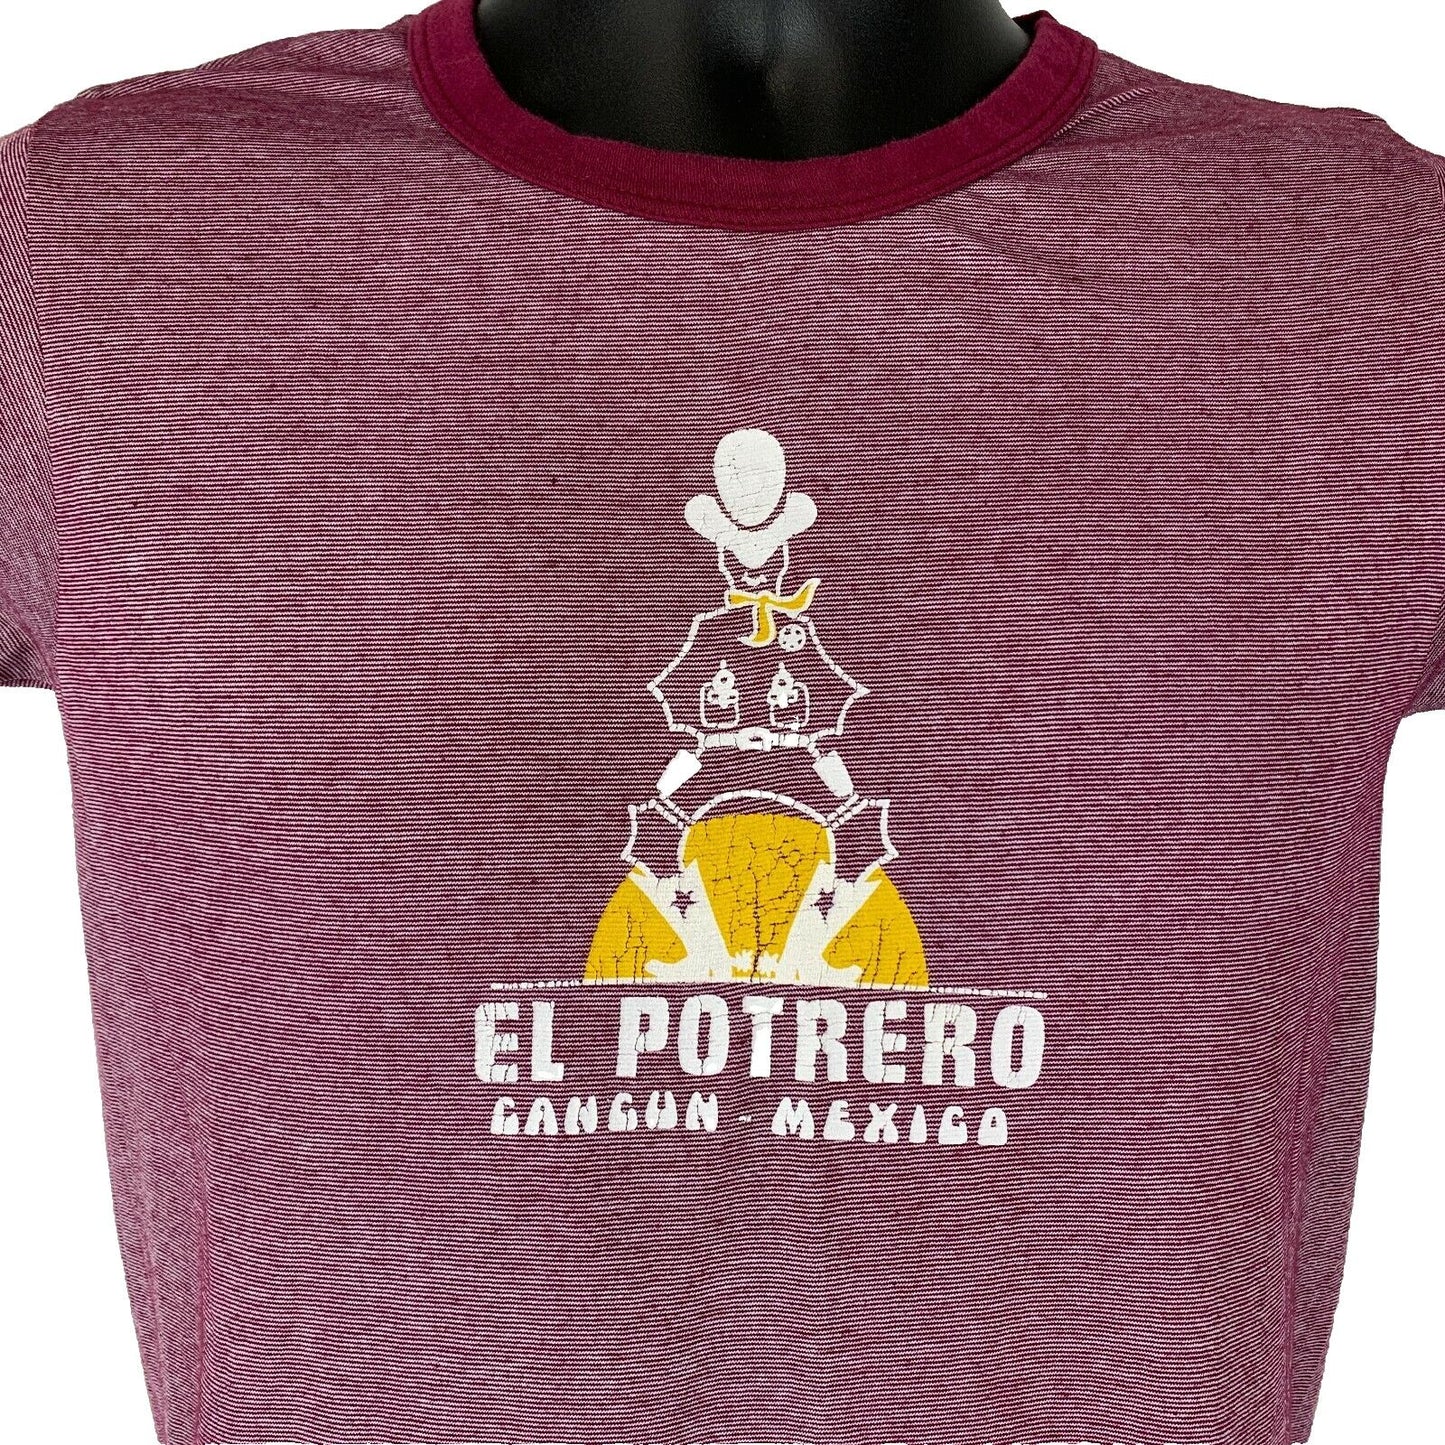 El Portero Cancun Mexico Vintage 70s 80s T Shirt Small Cowboy Red Graphic Tee